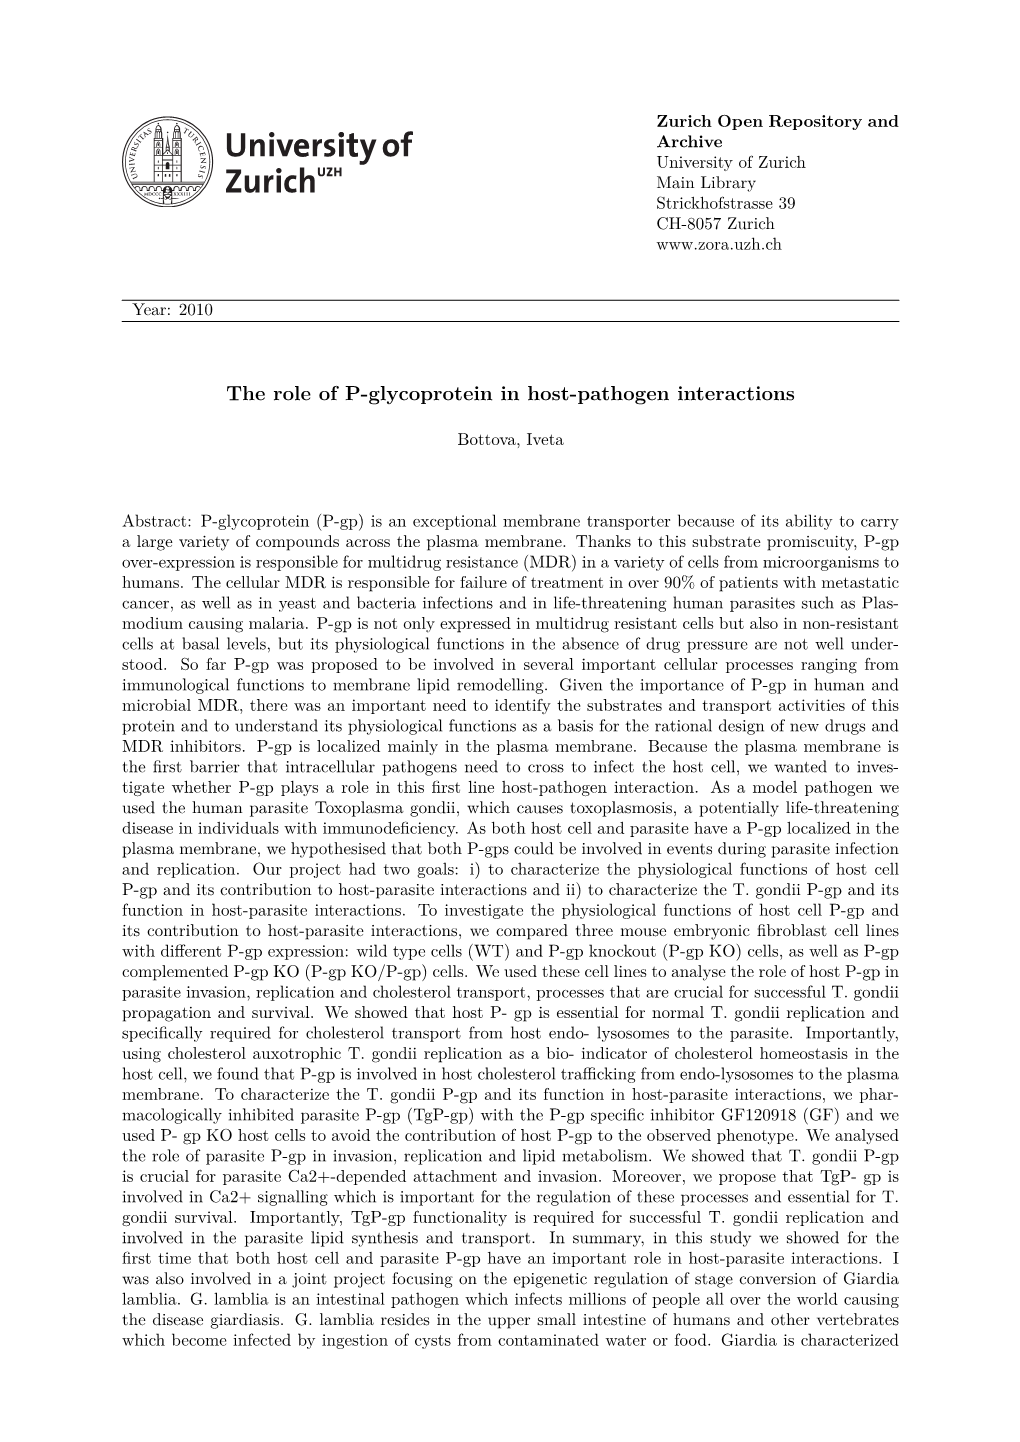 The Role of P-Glycoprotein in Host-Pathogen Interactions